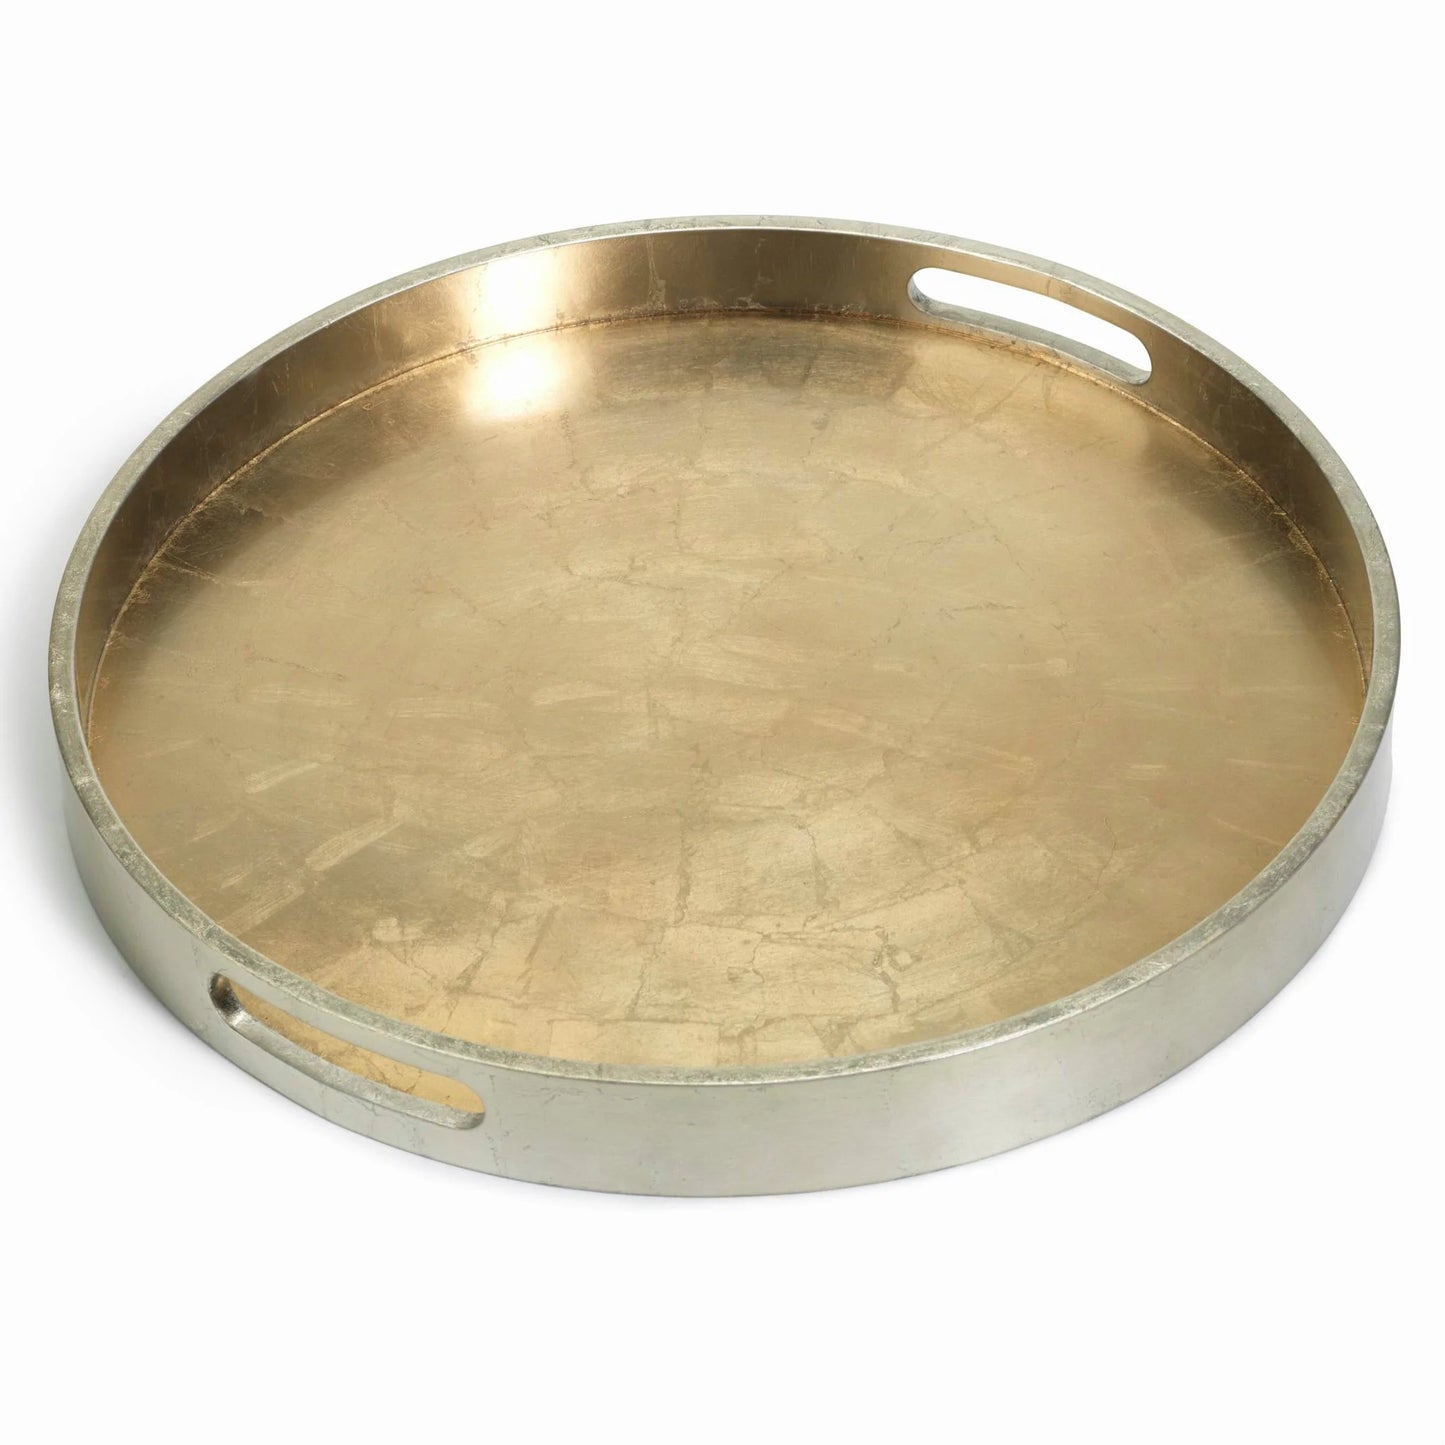 Antique Gold Round Serving Tray